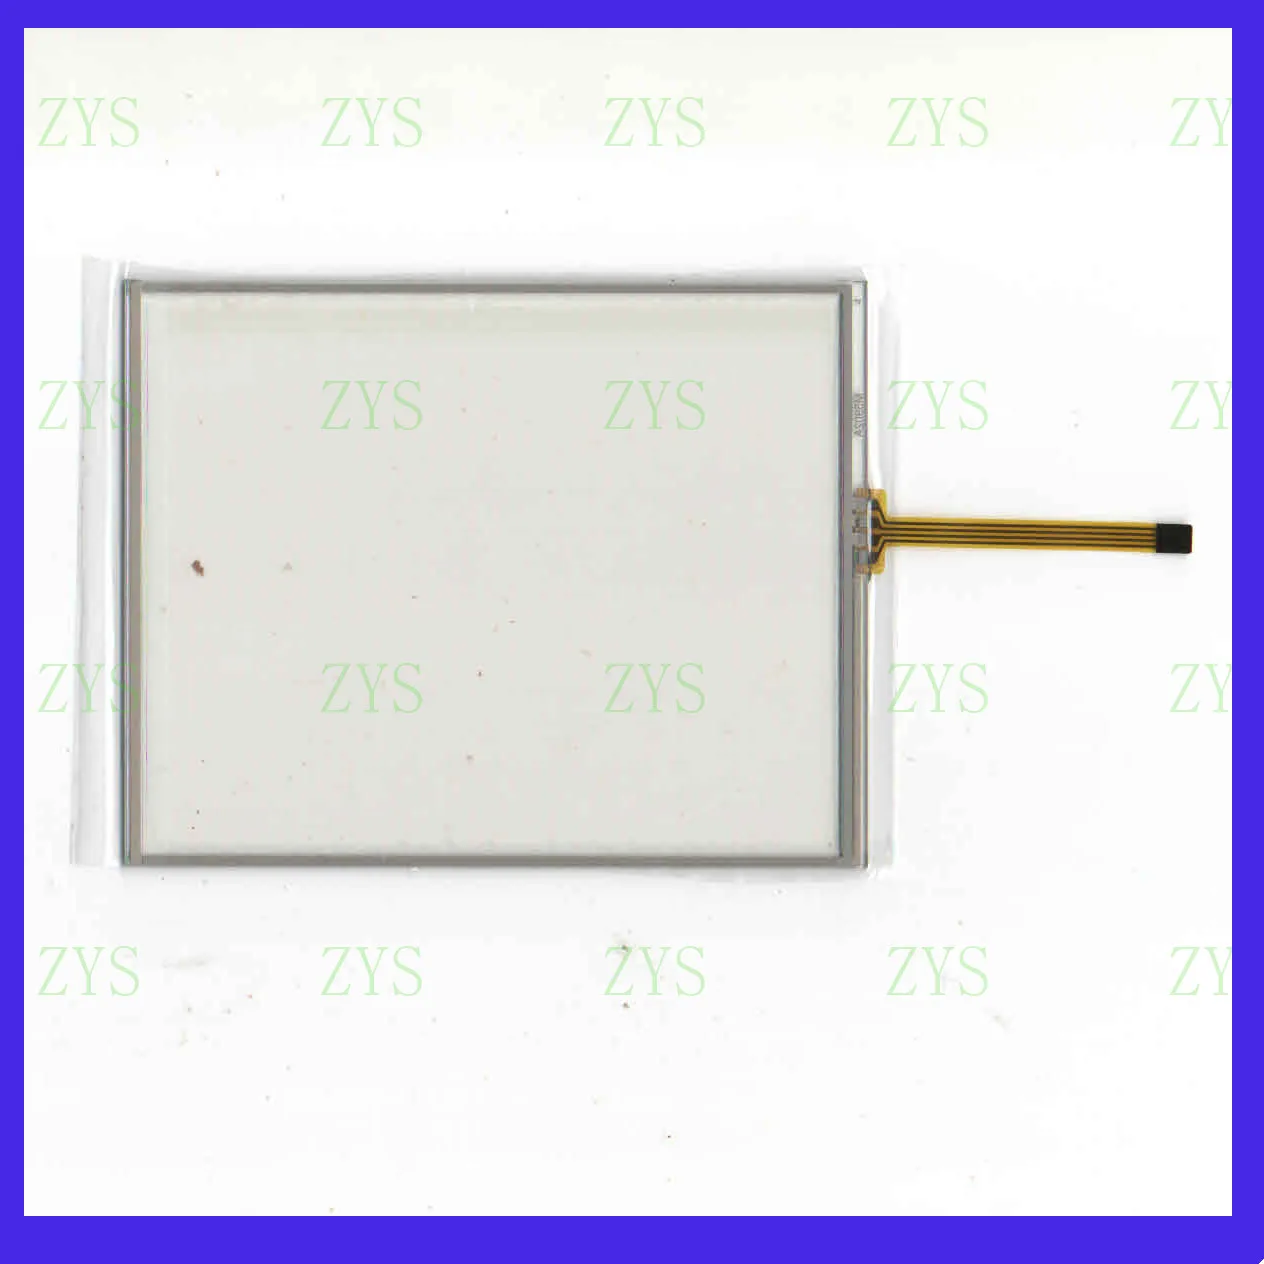 ZhiYuSun HR4 9081S01 NEW 4 line touch screen panel touch glass this is compatible touchsensor HR49081S01